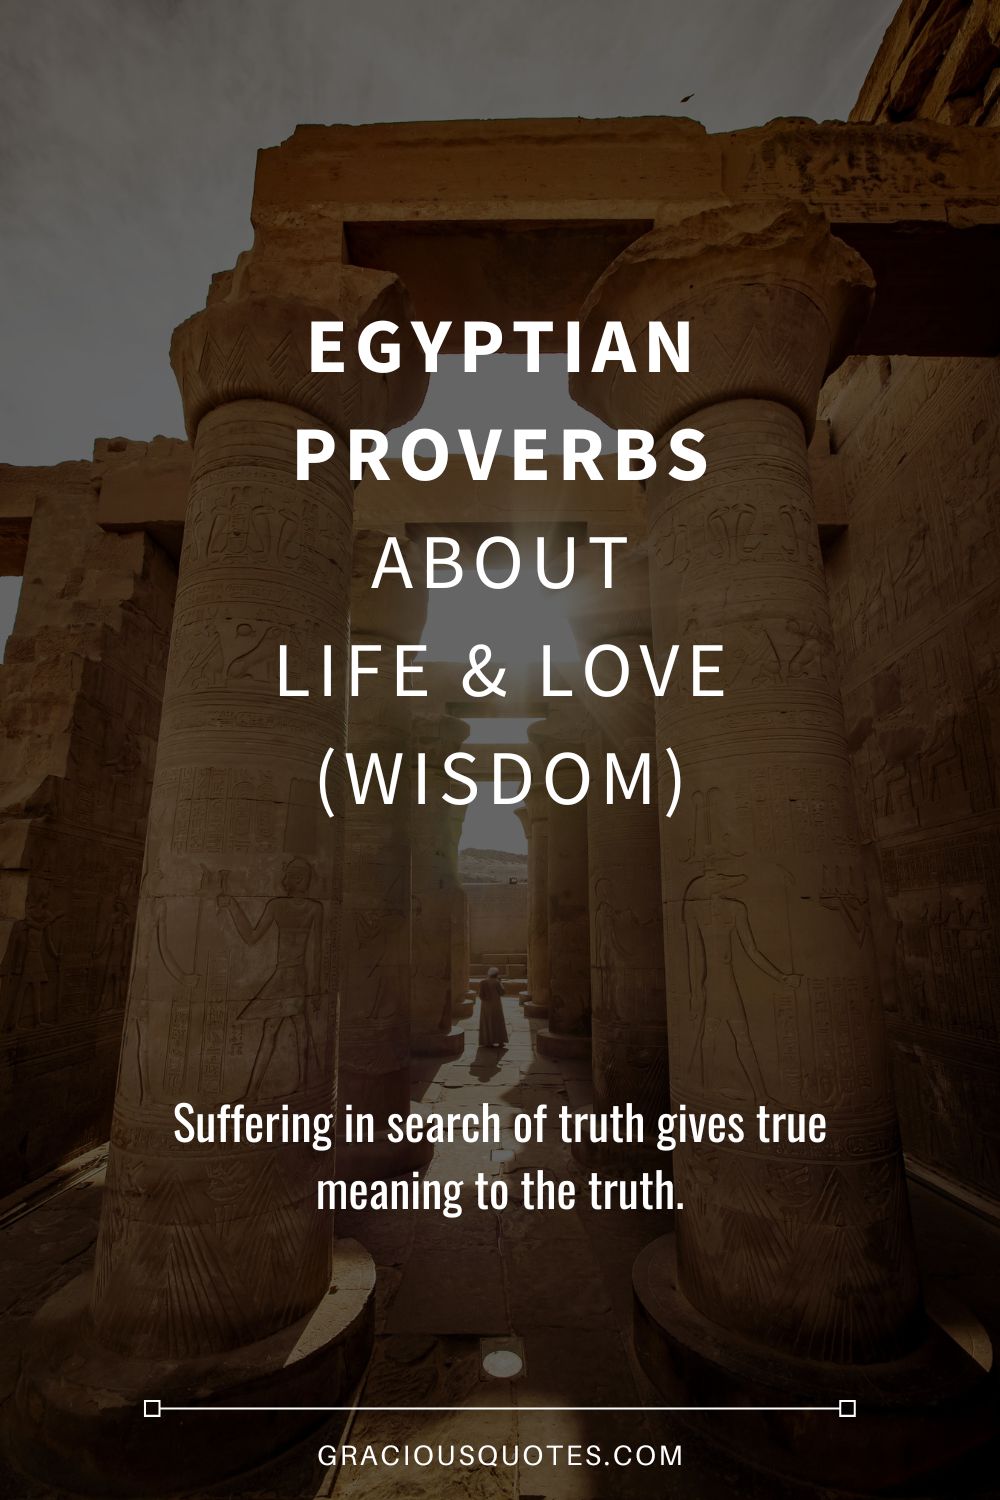 Egyptian Proverbs About Life & Love (WISDOM) - Gracious Quotes